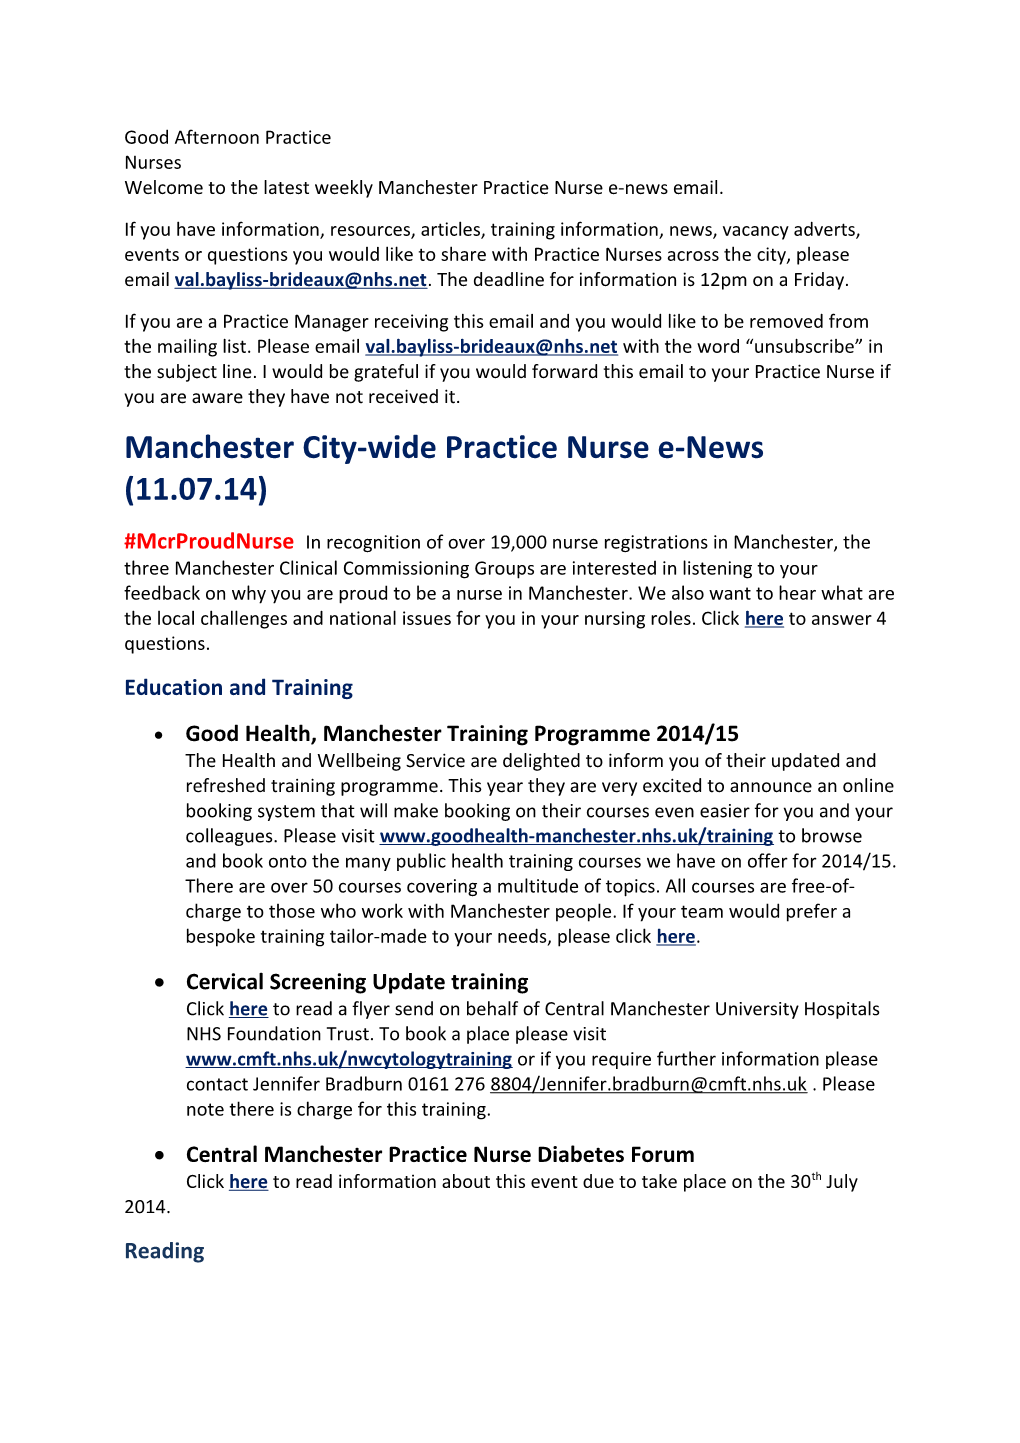 Welcome to Thelatest Weekly Manchester Practice Nurse E-News Email